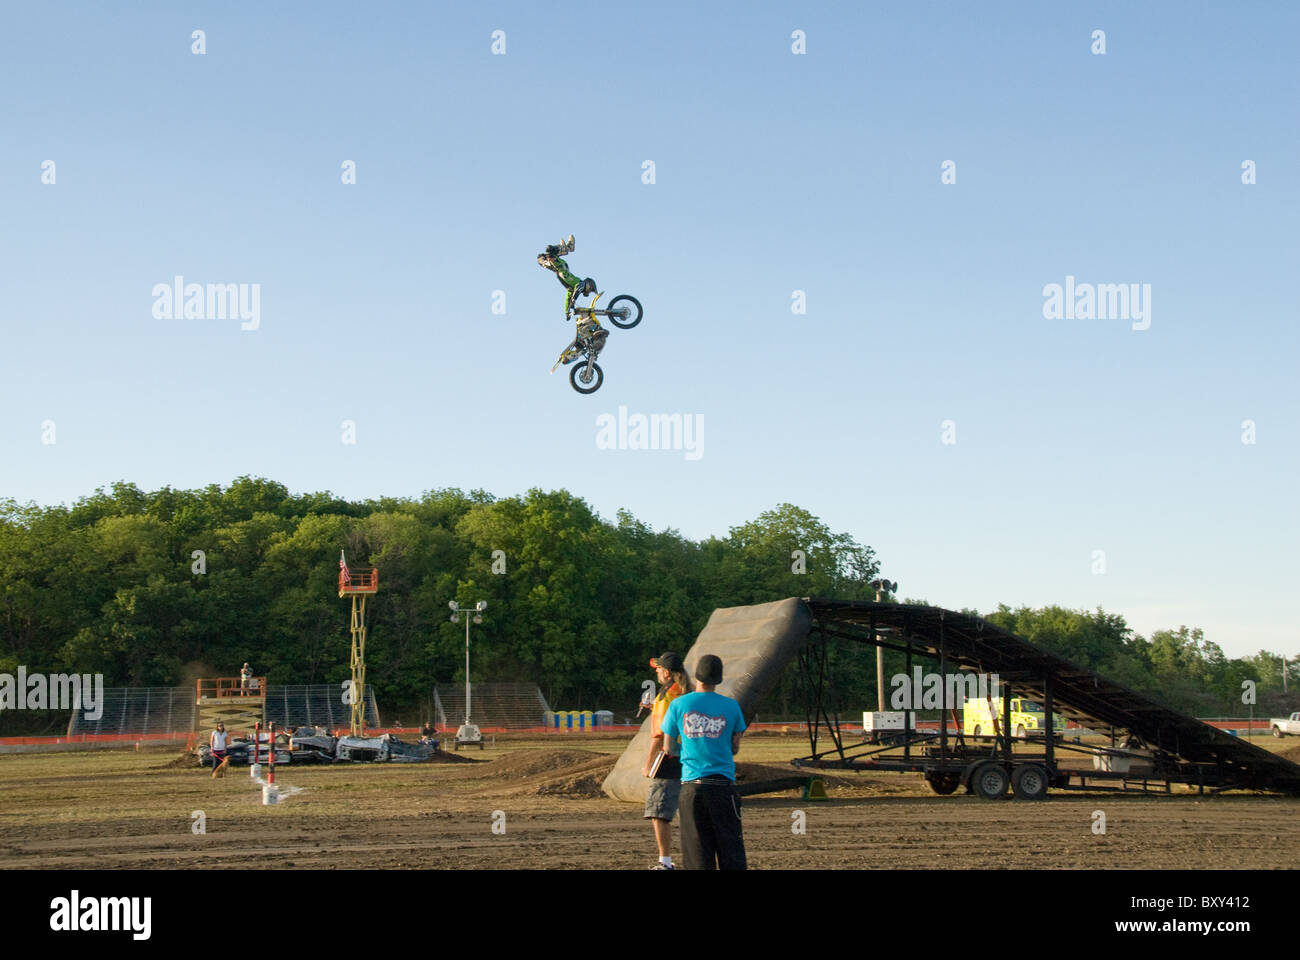 Bike Jump at LaPorte County Fairgrounds National Monster Truck Show Stock Photo